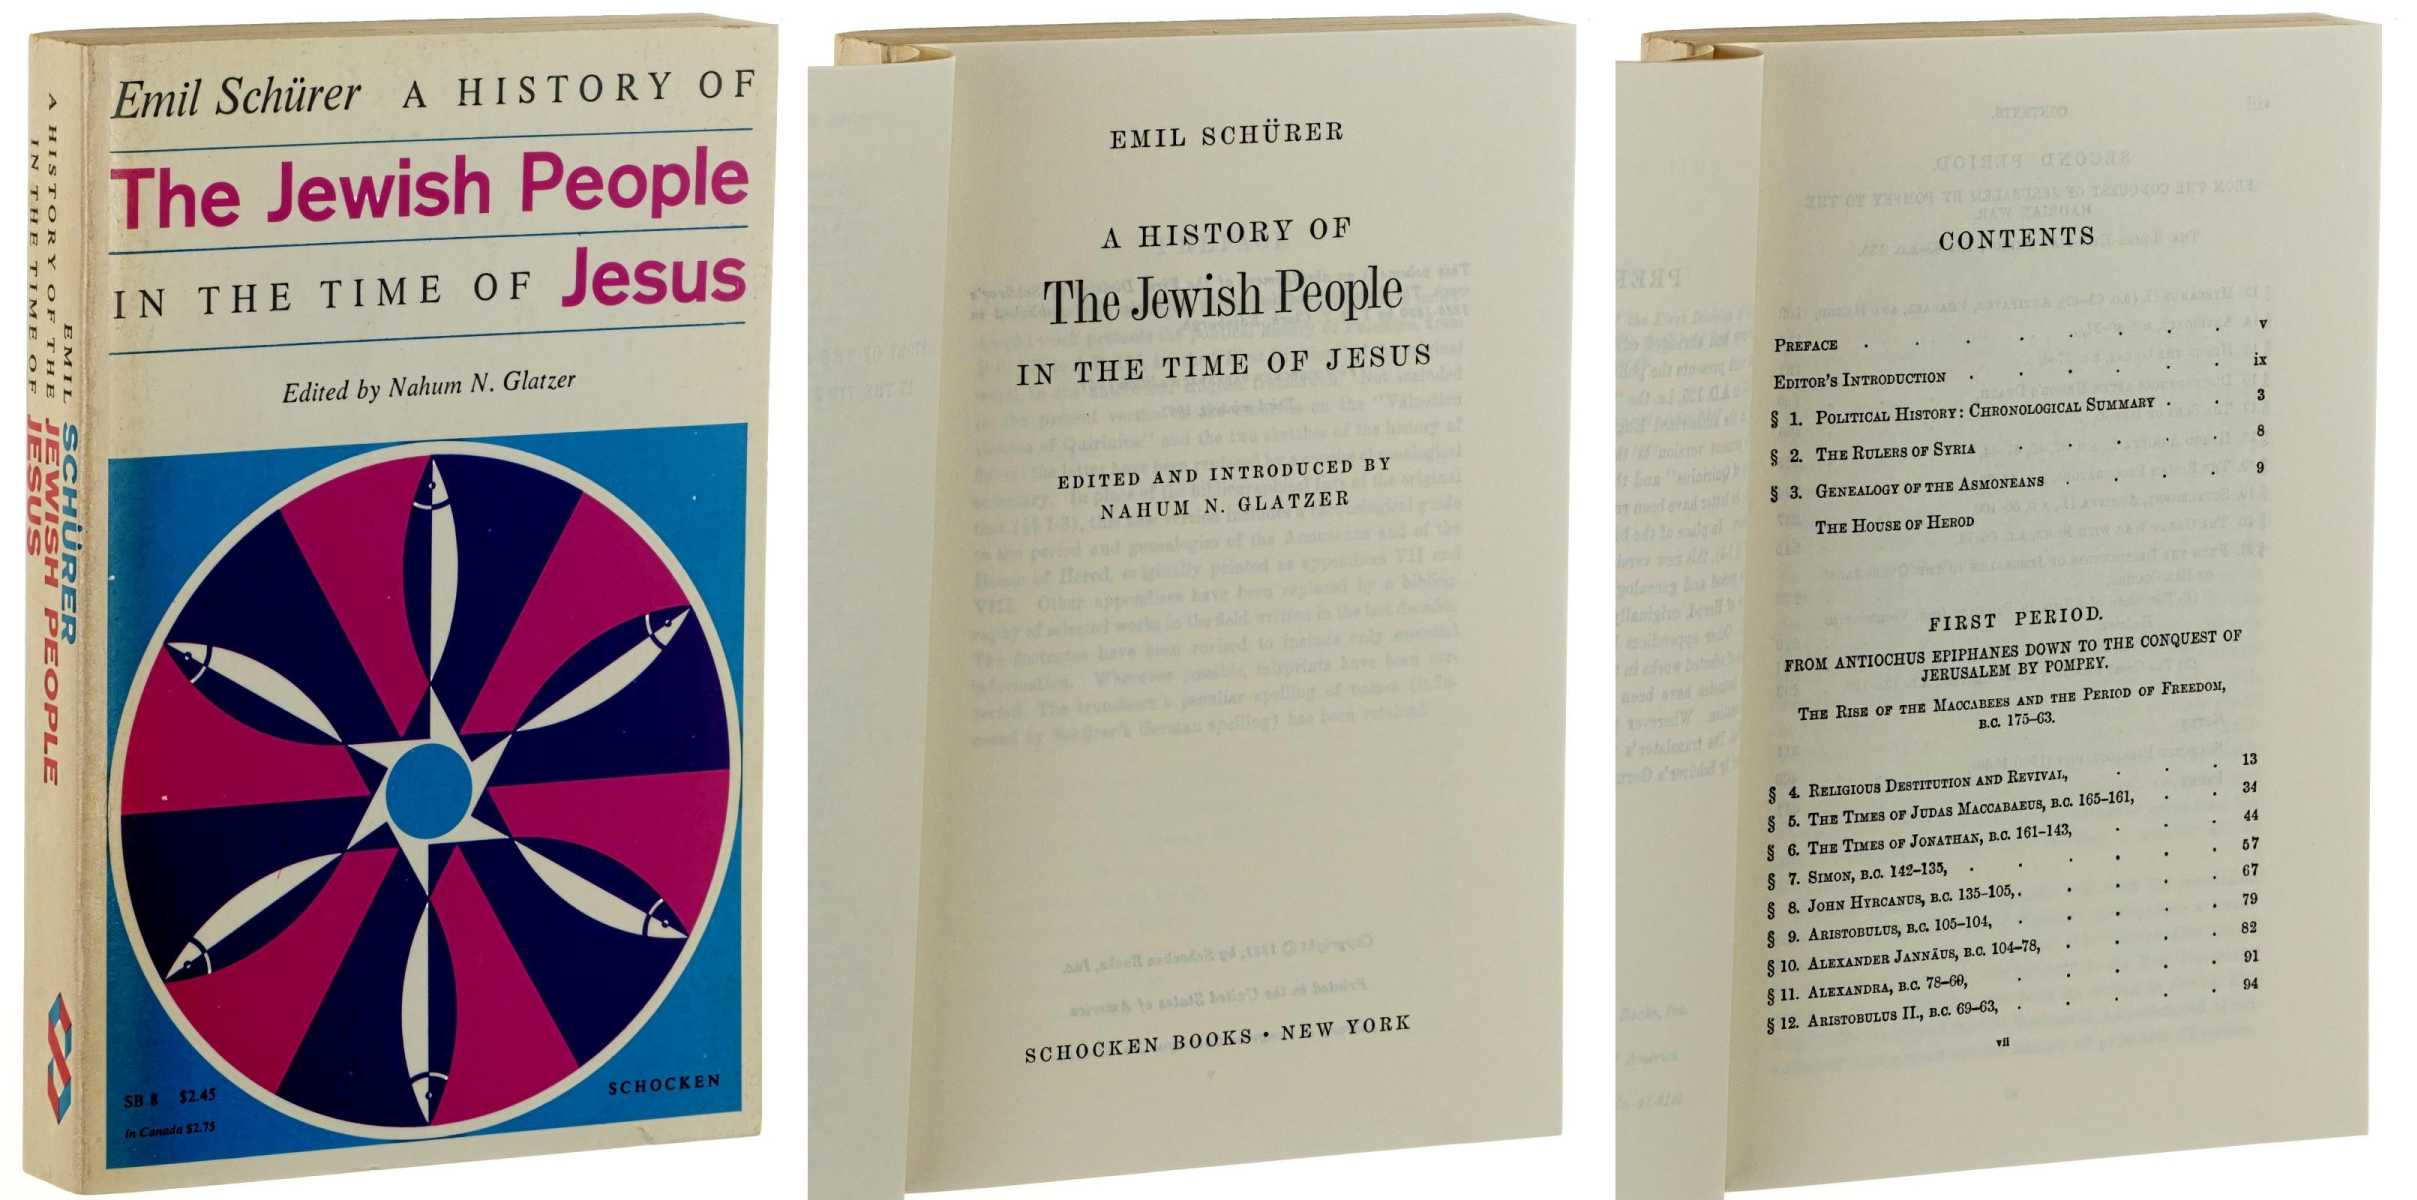 Schürer, Emil:  A History of the Jewish People in the Time of Jesus. Edited and introduced by N. Glatzer Nahum. 